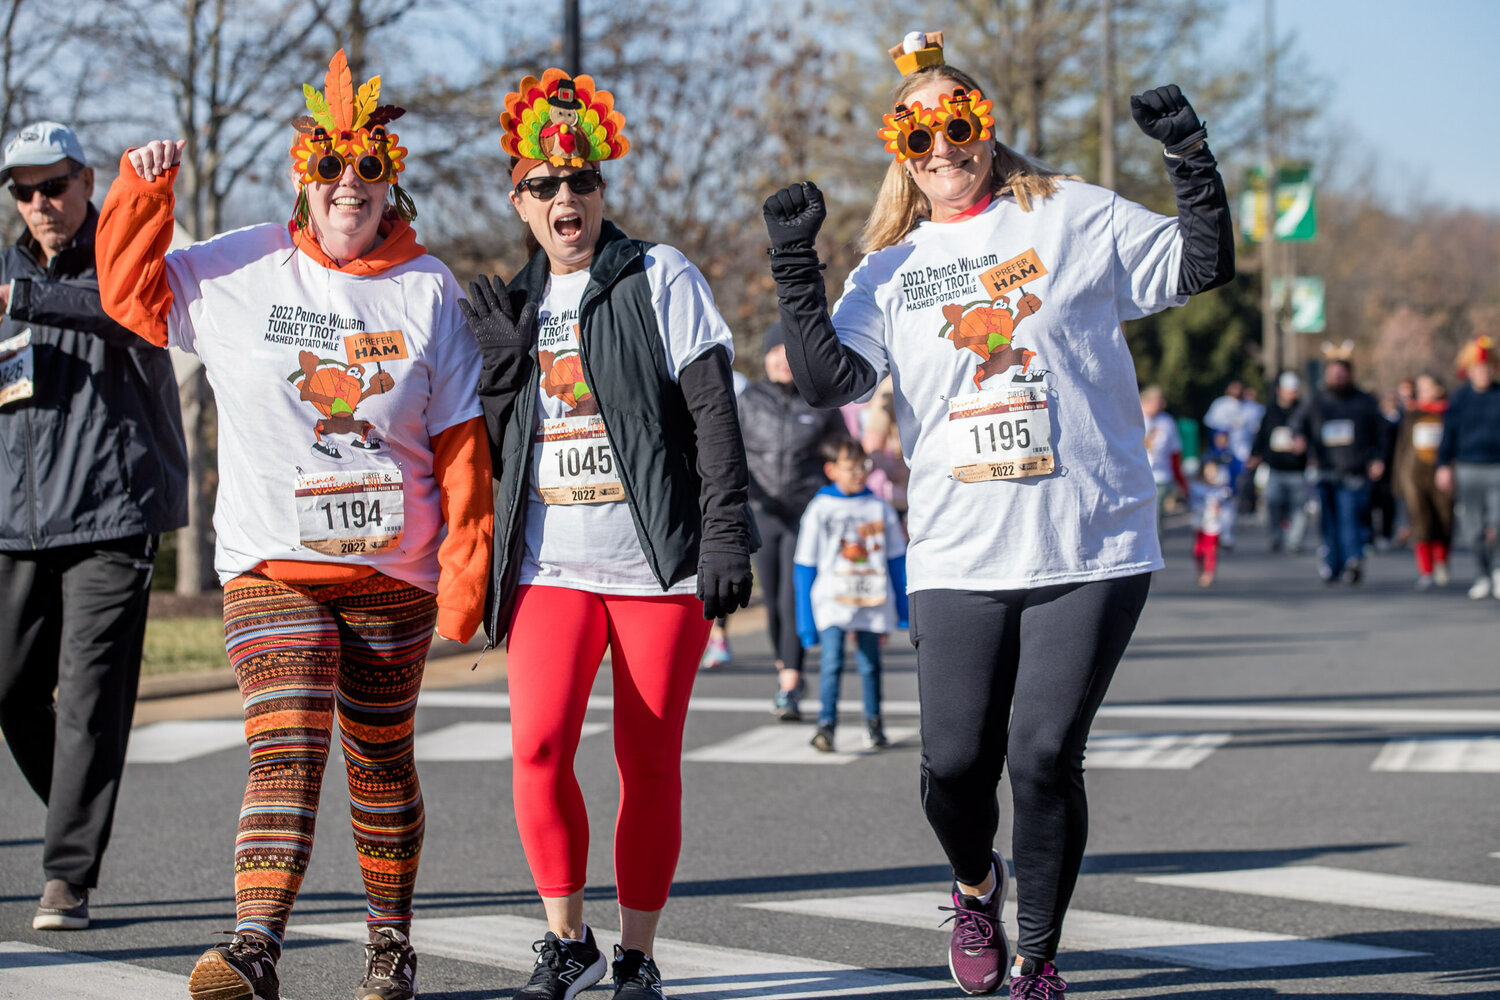 Friends coordinate dress to run together at the Prince William Turkey Trot.